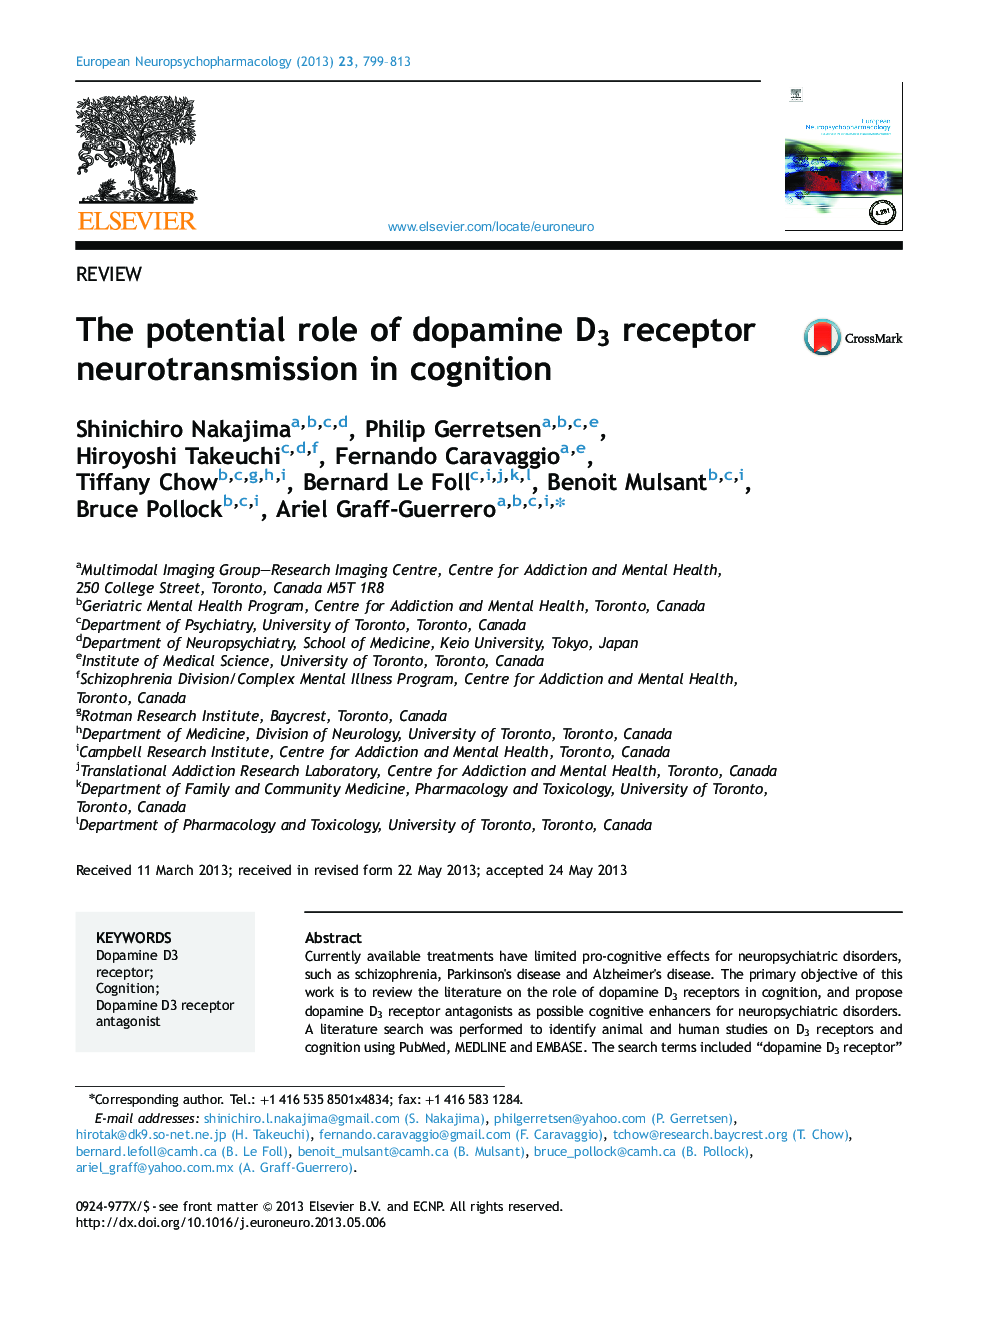 The potential role of dopamine D3 receptor neurotransmission in cognition